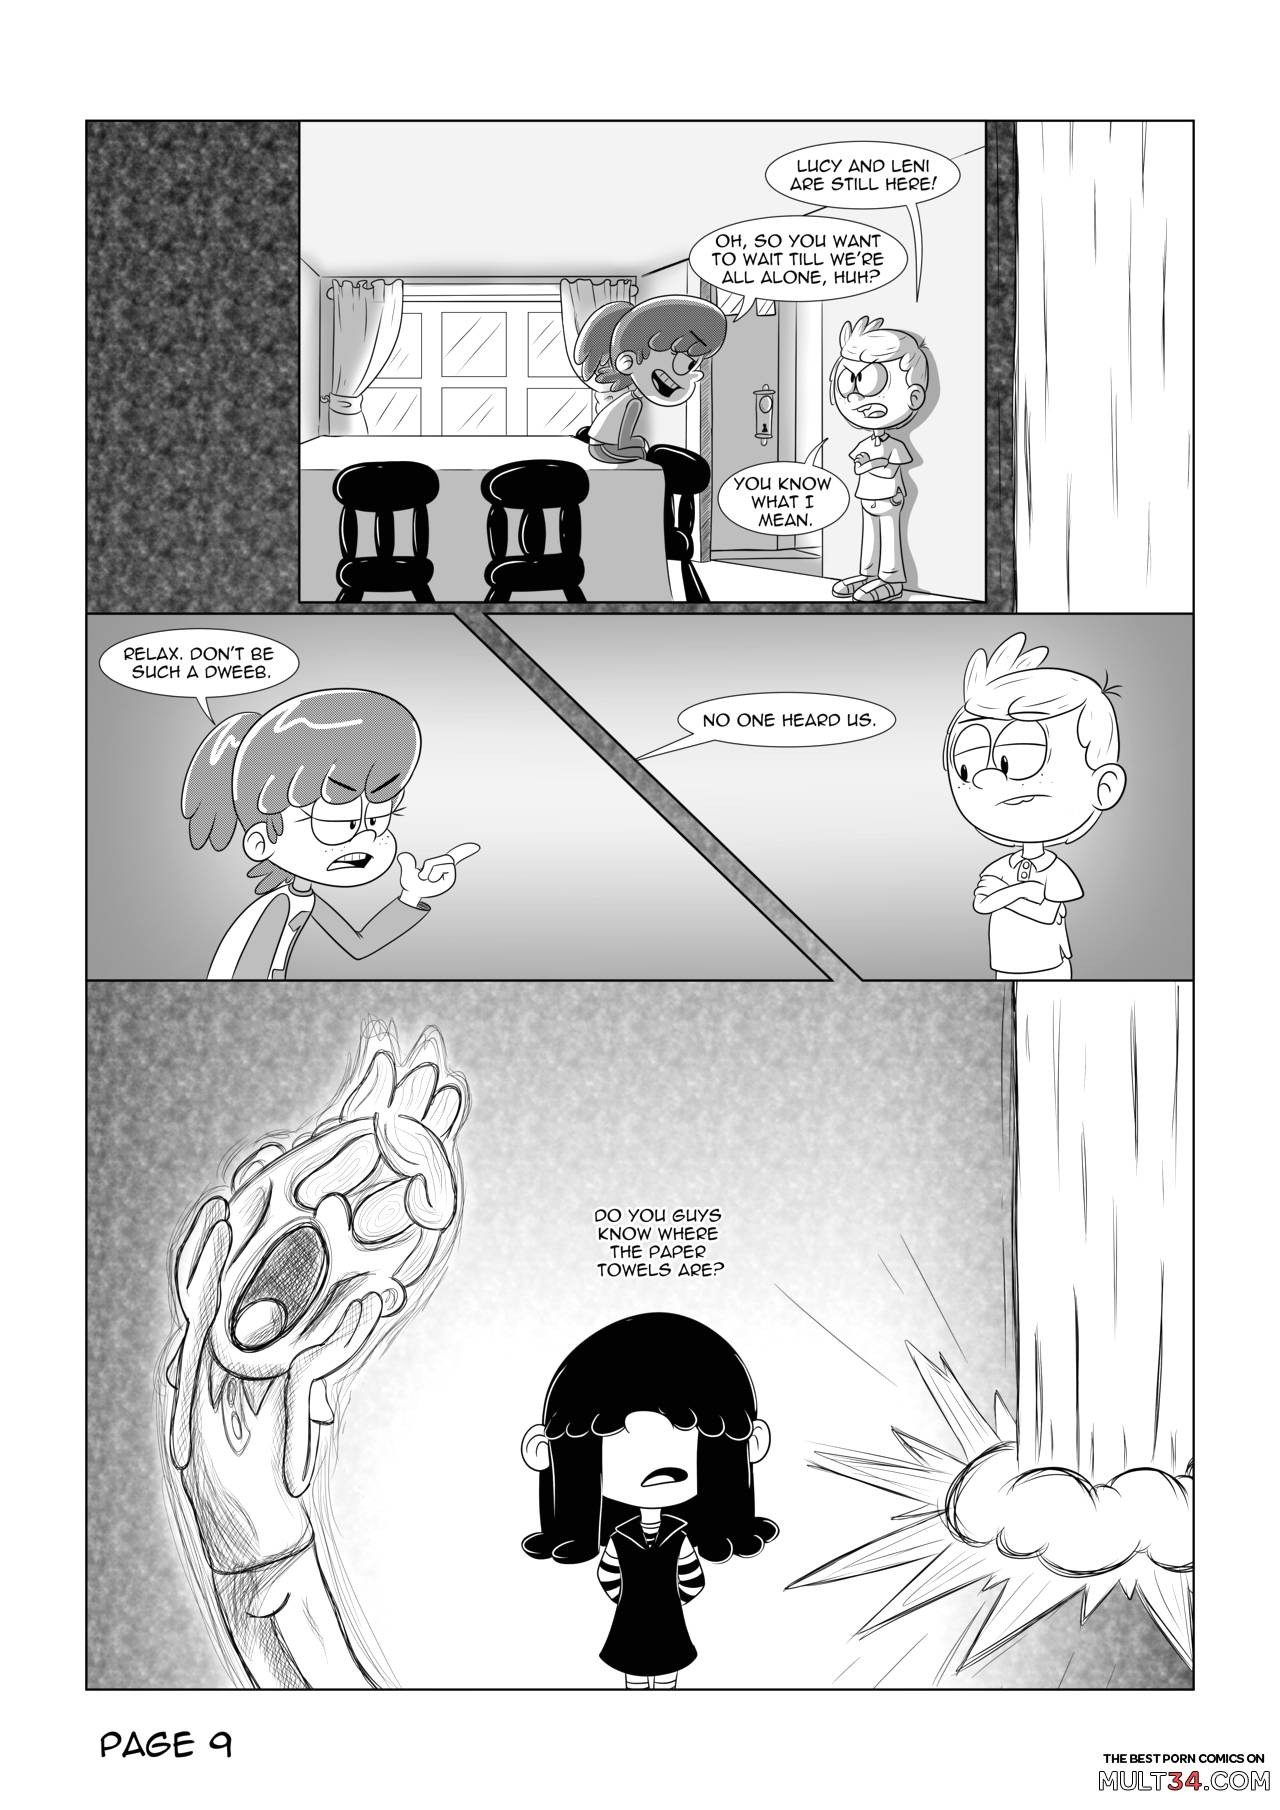 The loud house comic, chapter 3 page 10